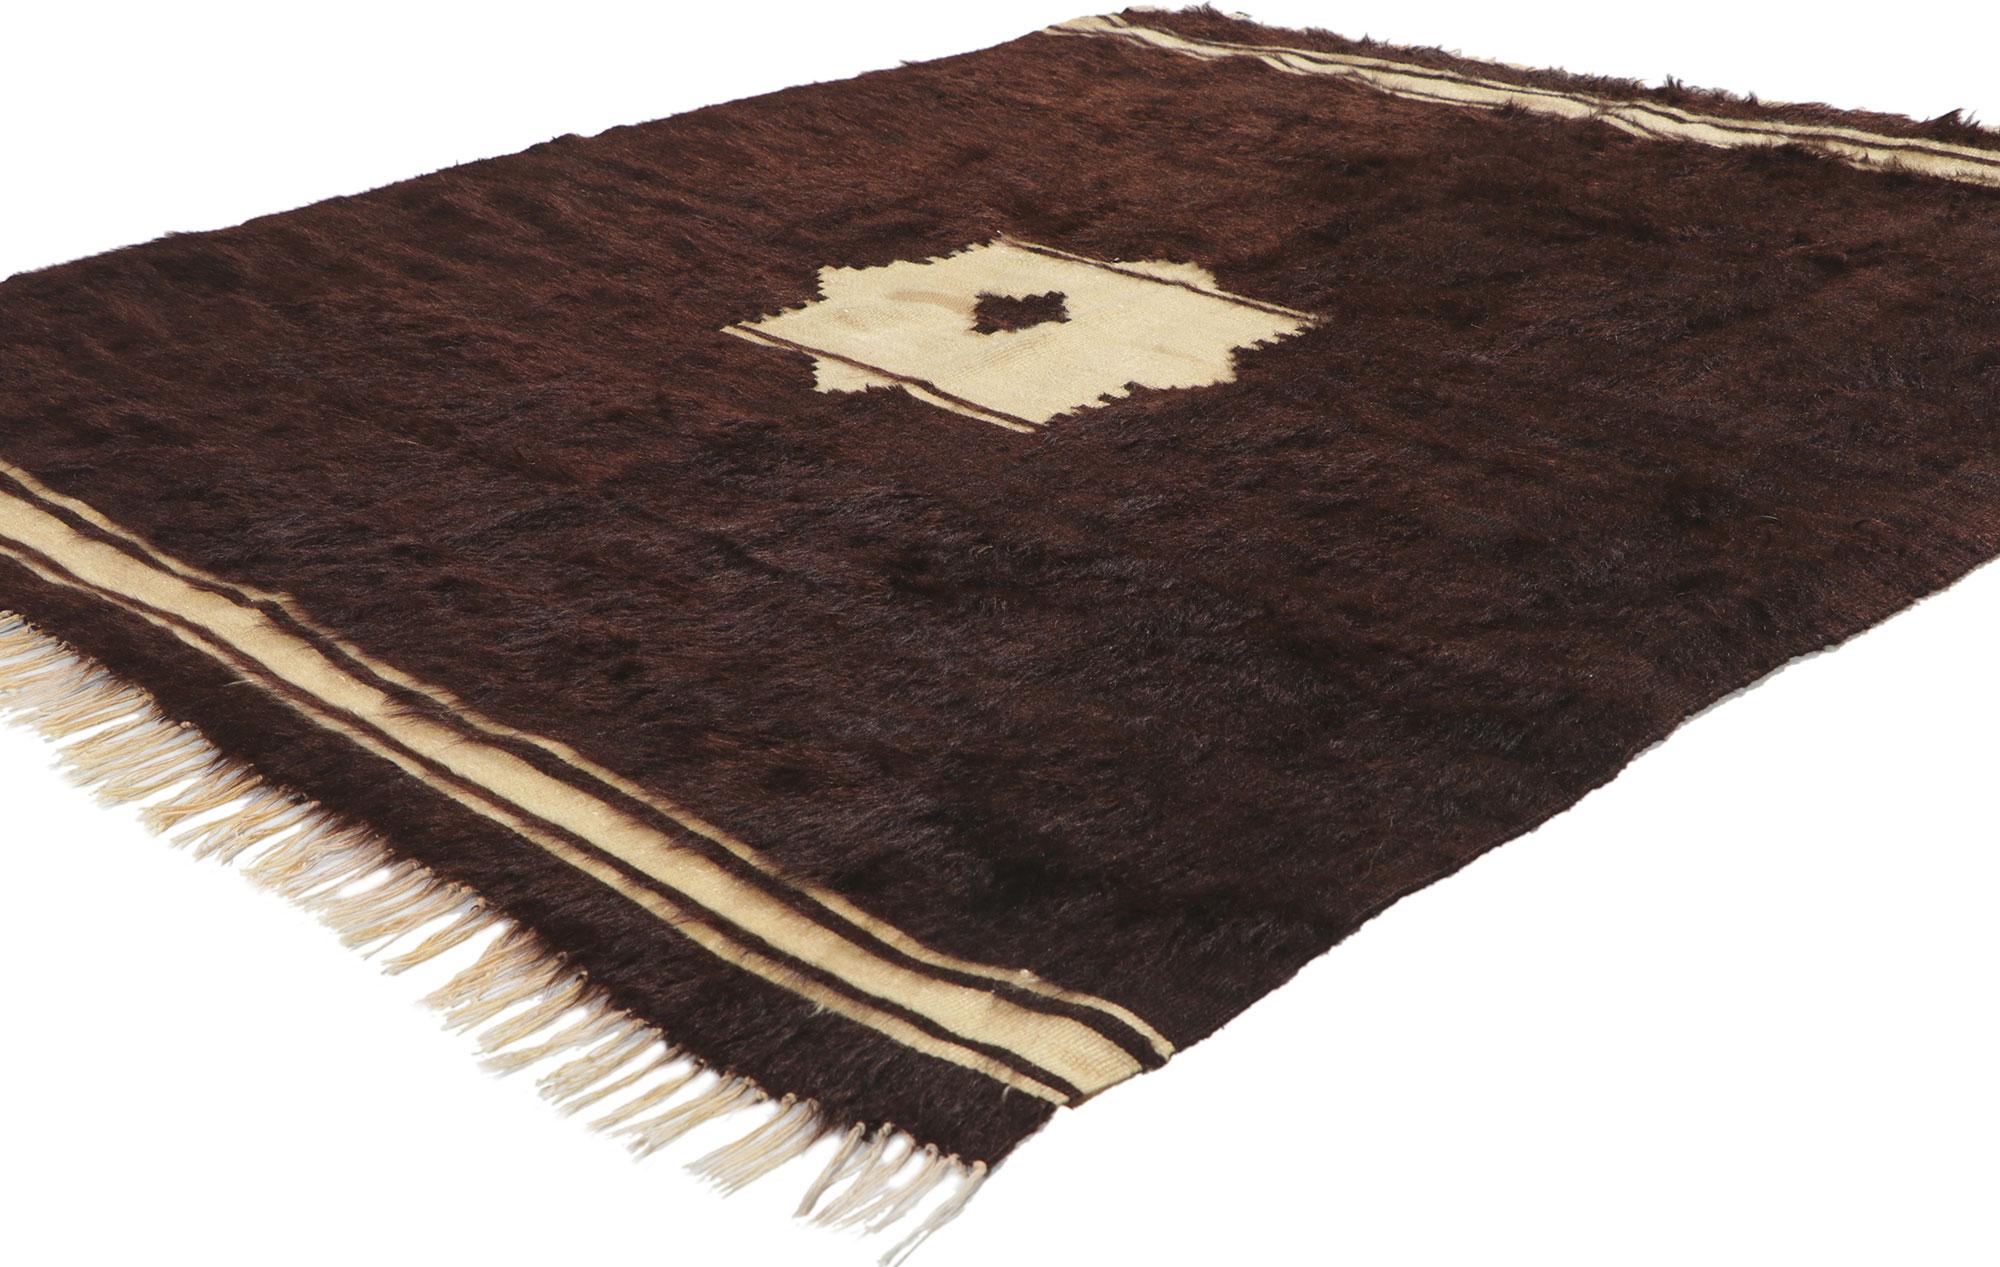 53852 Vintage Turkish Angora Wool Blanket Kilim rug, 04'08 x 05'04. With its shaggy pile, incredible detail and texture, this handwoven Turkish angora kilim rug is a captivating vision of woven beauty. The eye-catching geometric design and earthy